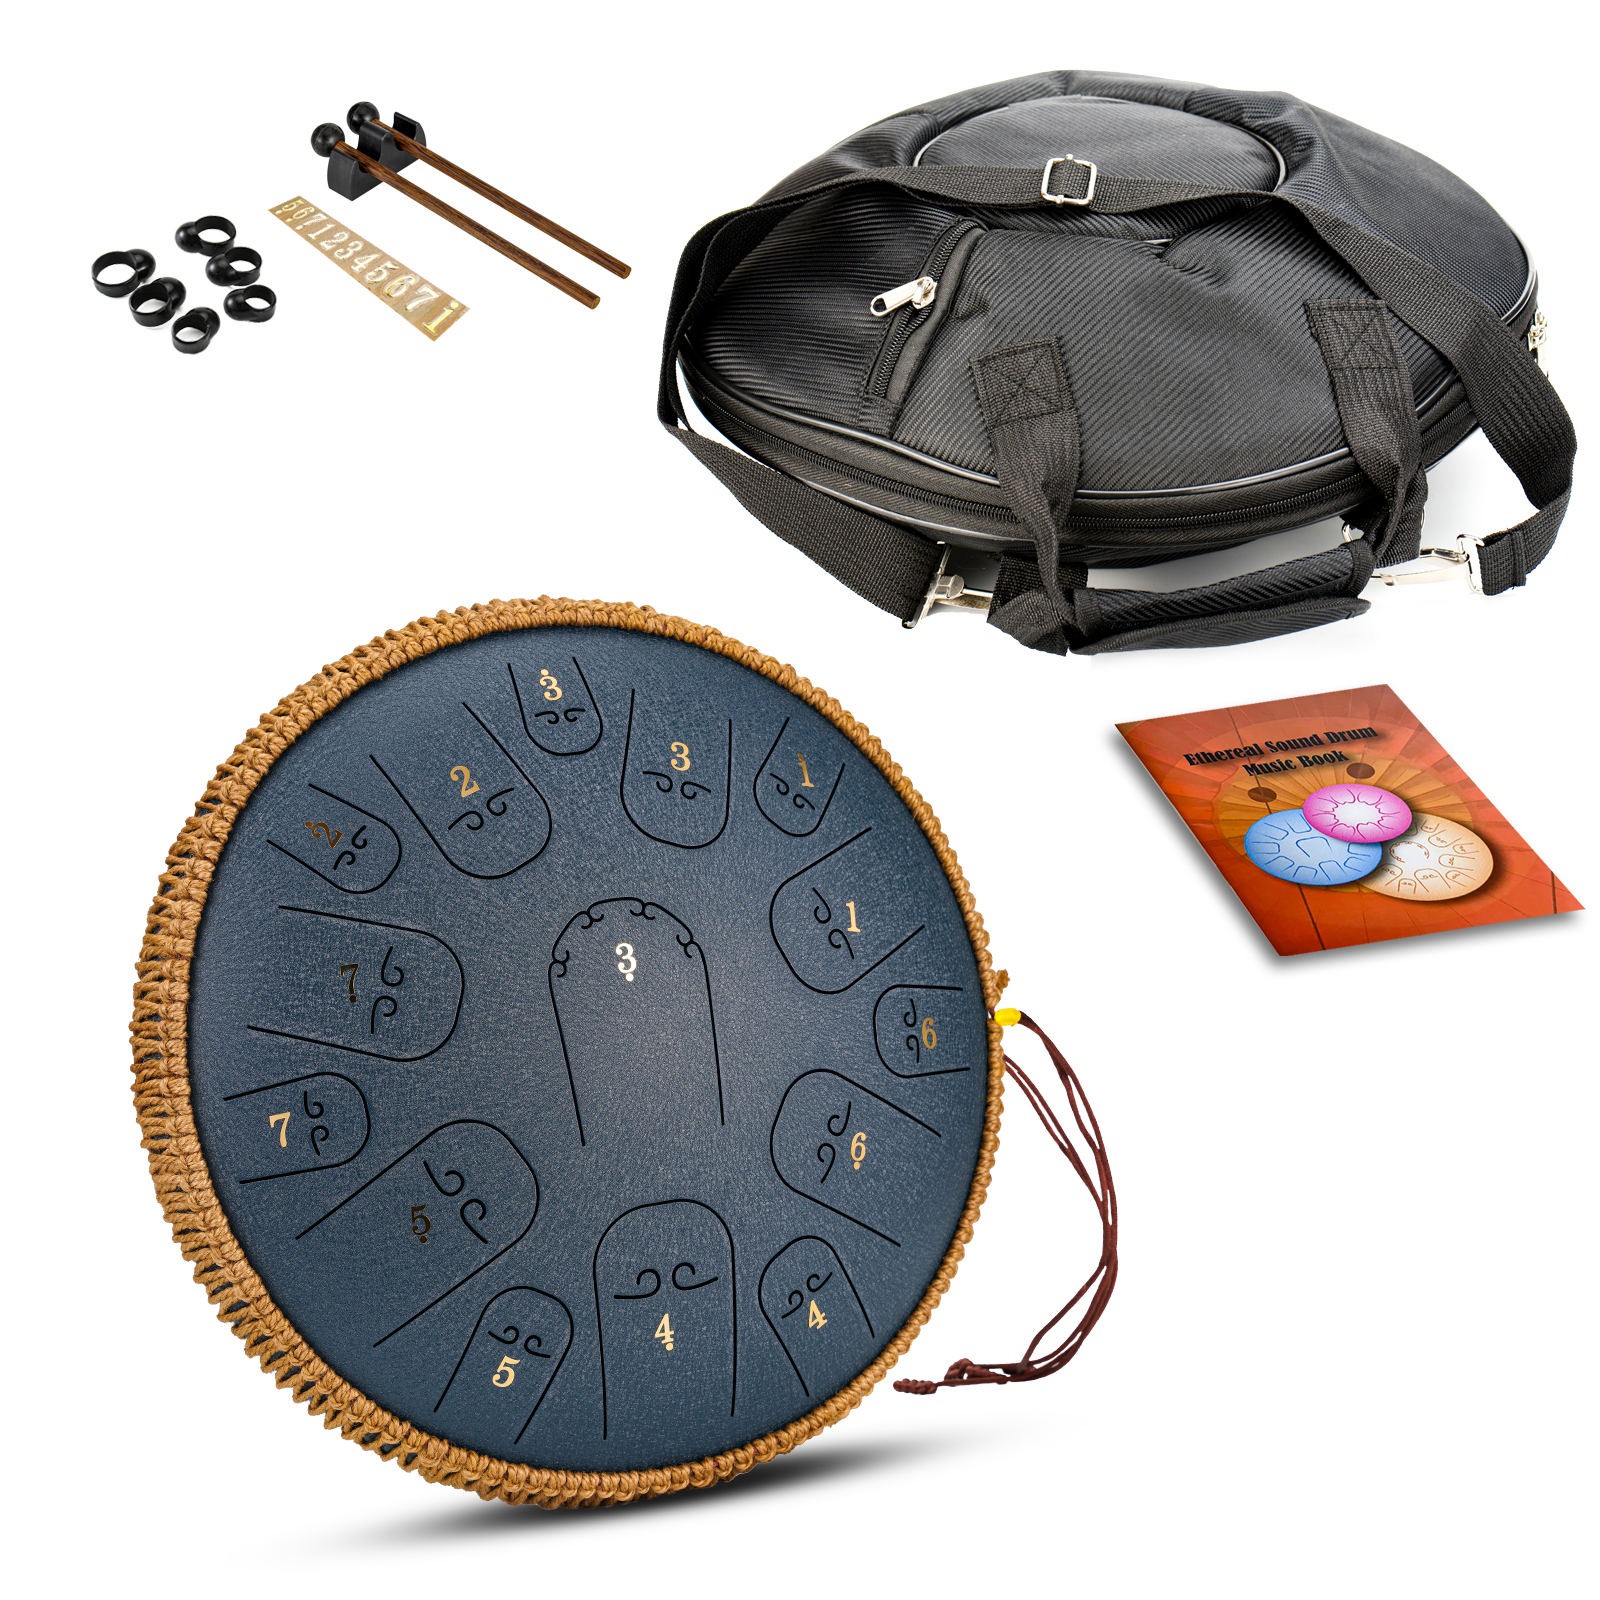 Steel Tongue Drum, 15 Notes 14 inch D-Key Handpan Percussion Instrument -  Tank Chakra Drums with Padded Travel Bag, 2 Mallets, for Meditation